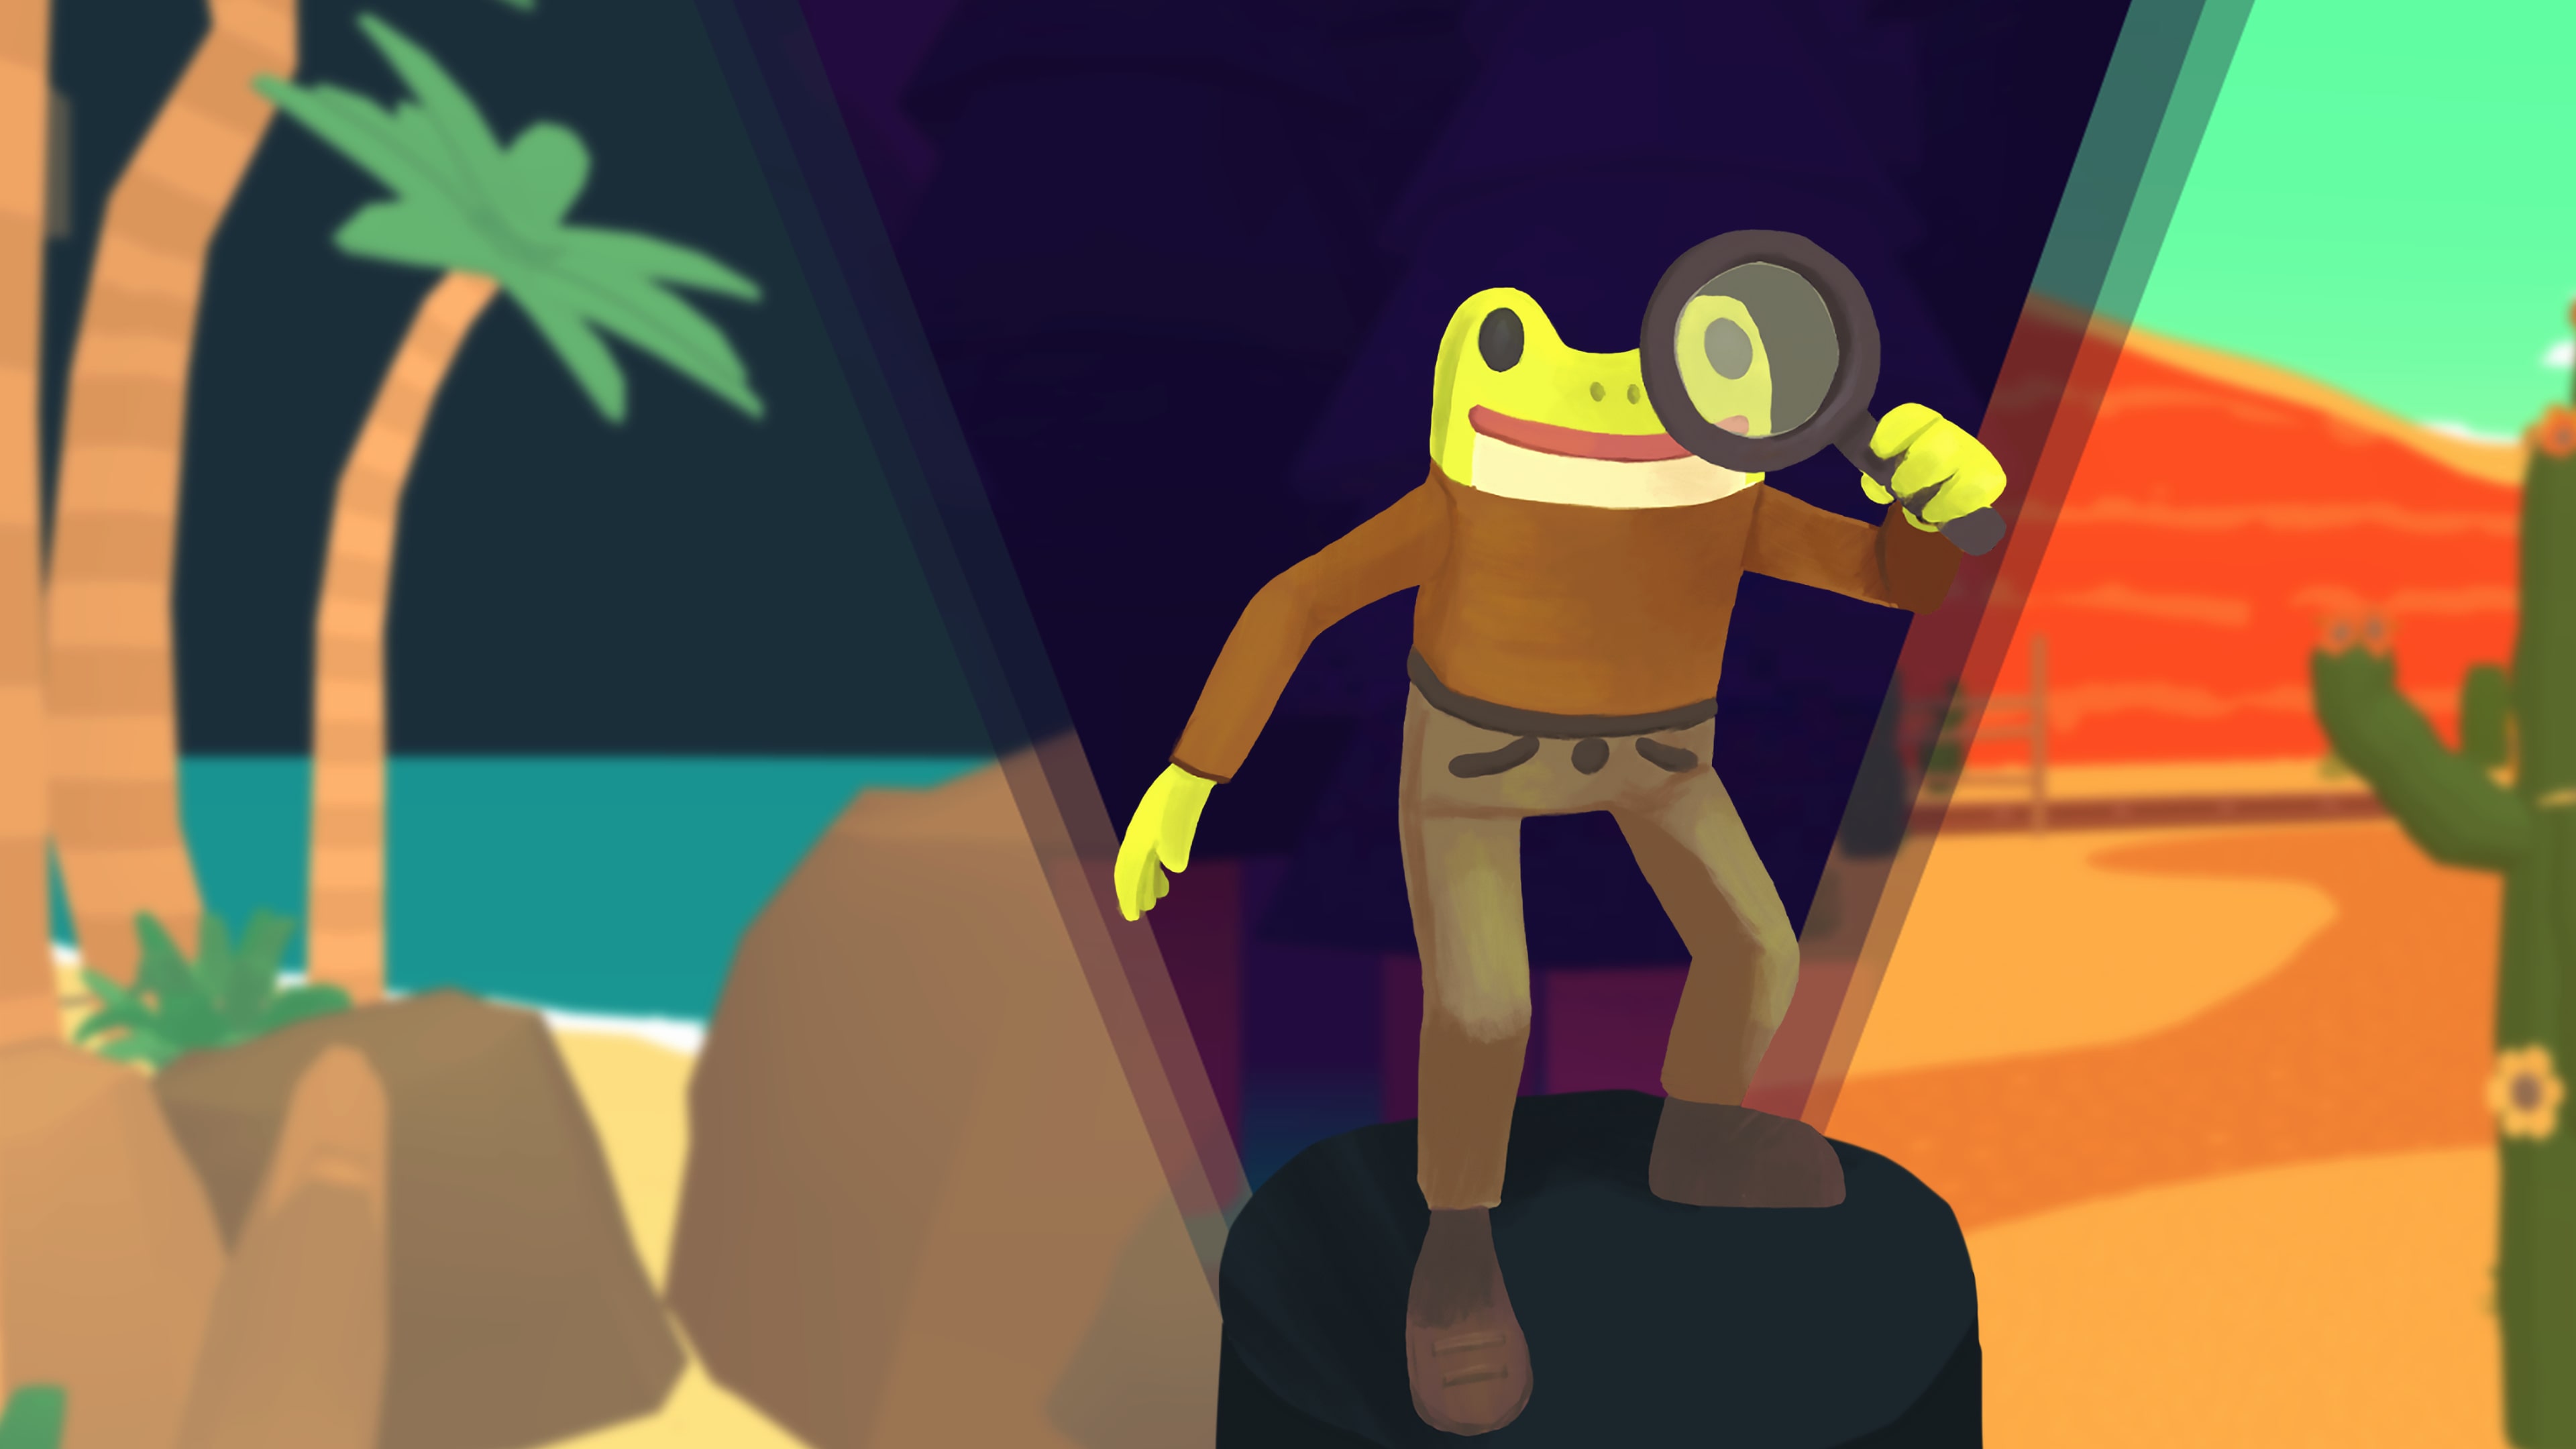 Frog Detective: The Entire Mystery PS4 & PS5